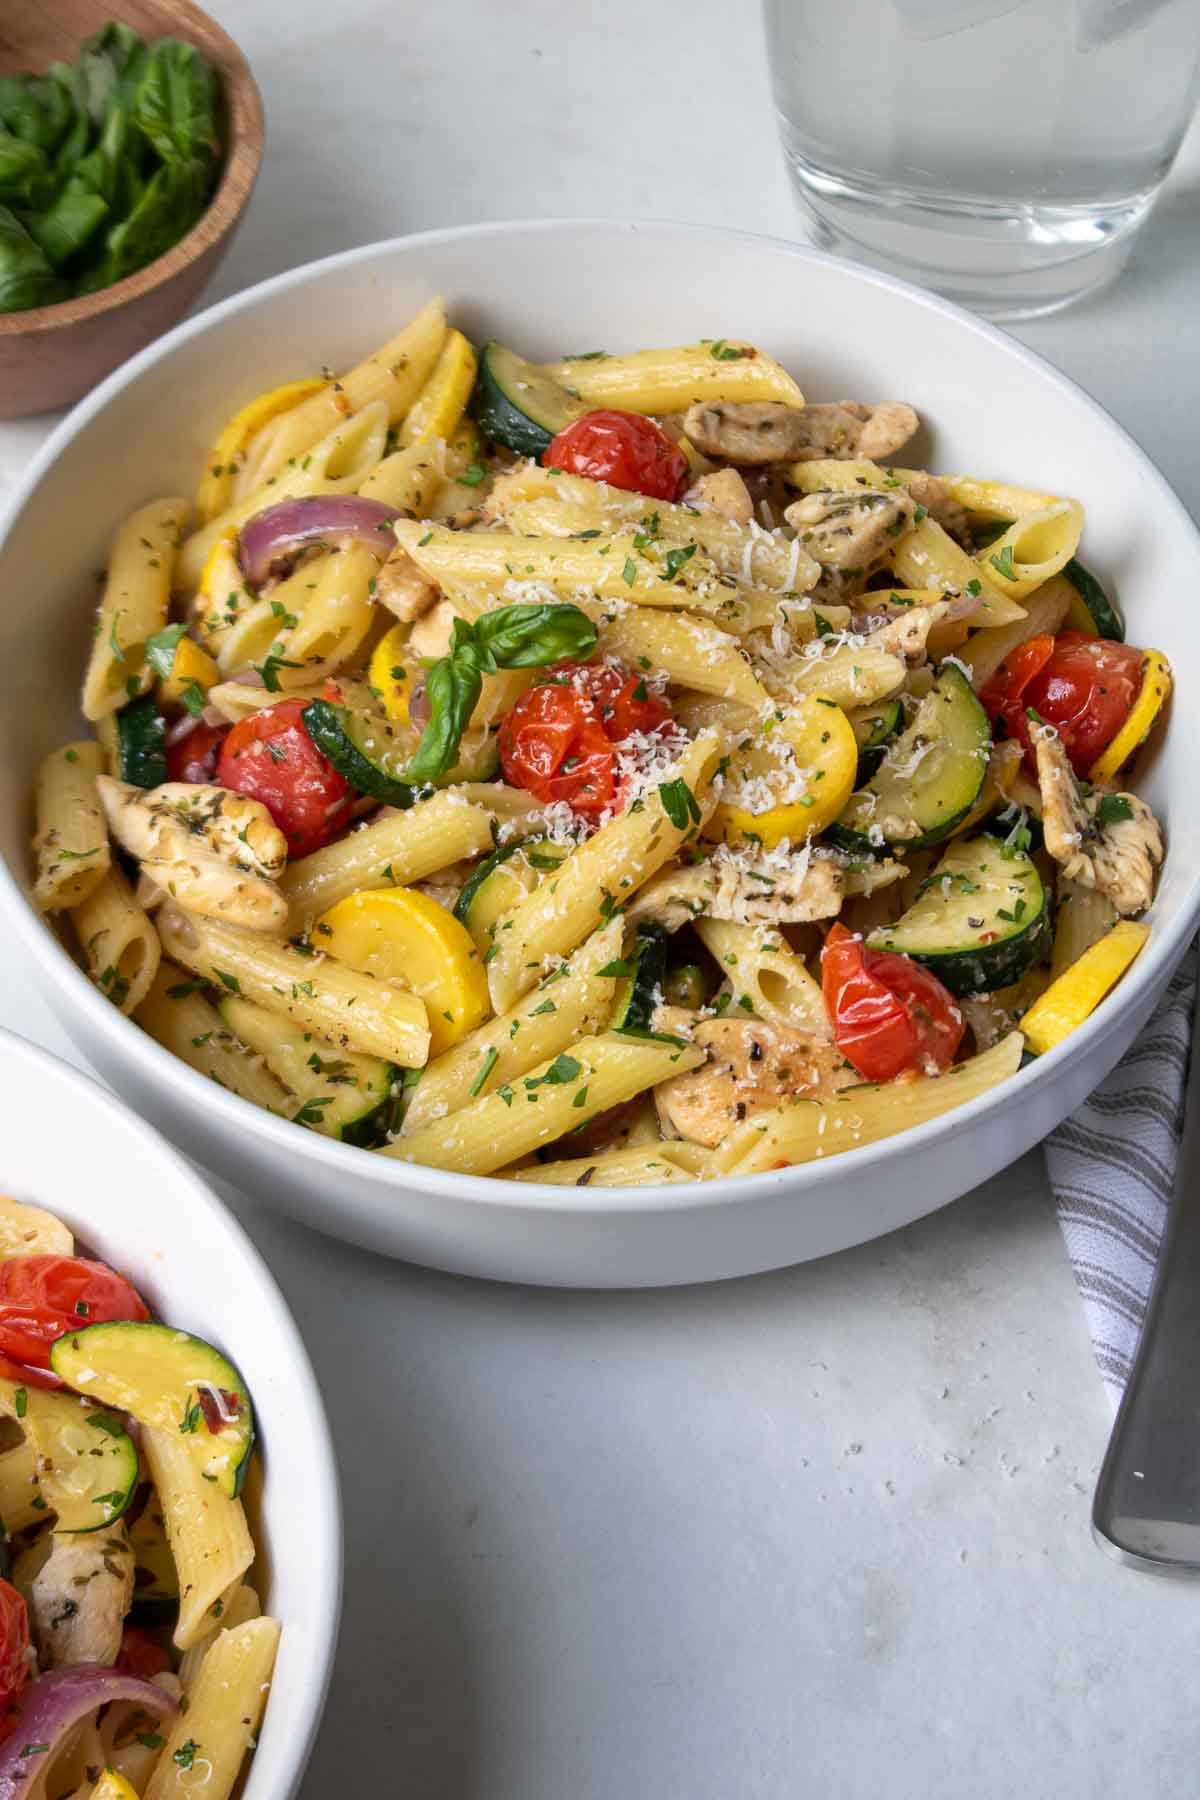 Two bowls of pasta with chicken and vegetables with a fork and napkin.